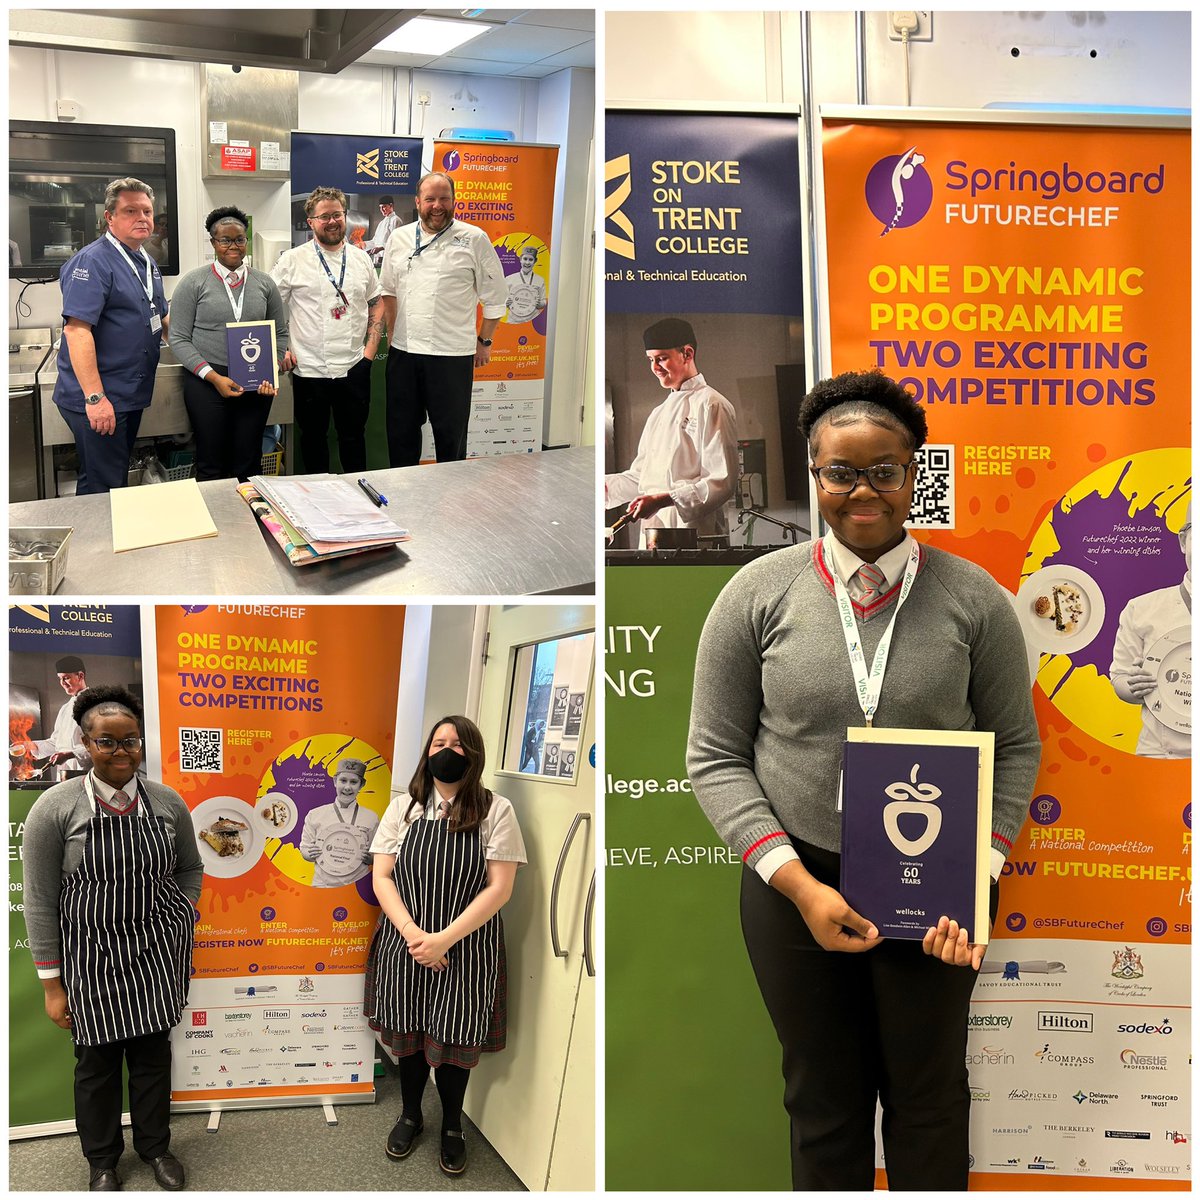 We’re absolutely delighted to announce that today Keisha won the local final of @SBFutureChef for her fantastic cooking skills #proudteacher @MoretonSchool @MoretonDT @TeamMoreton11 @MrRuthven1 @AmethystAcademy